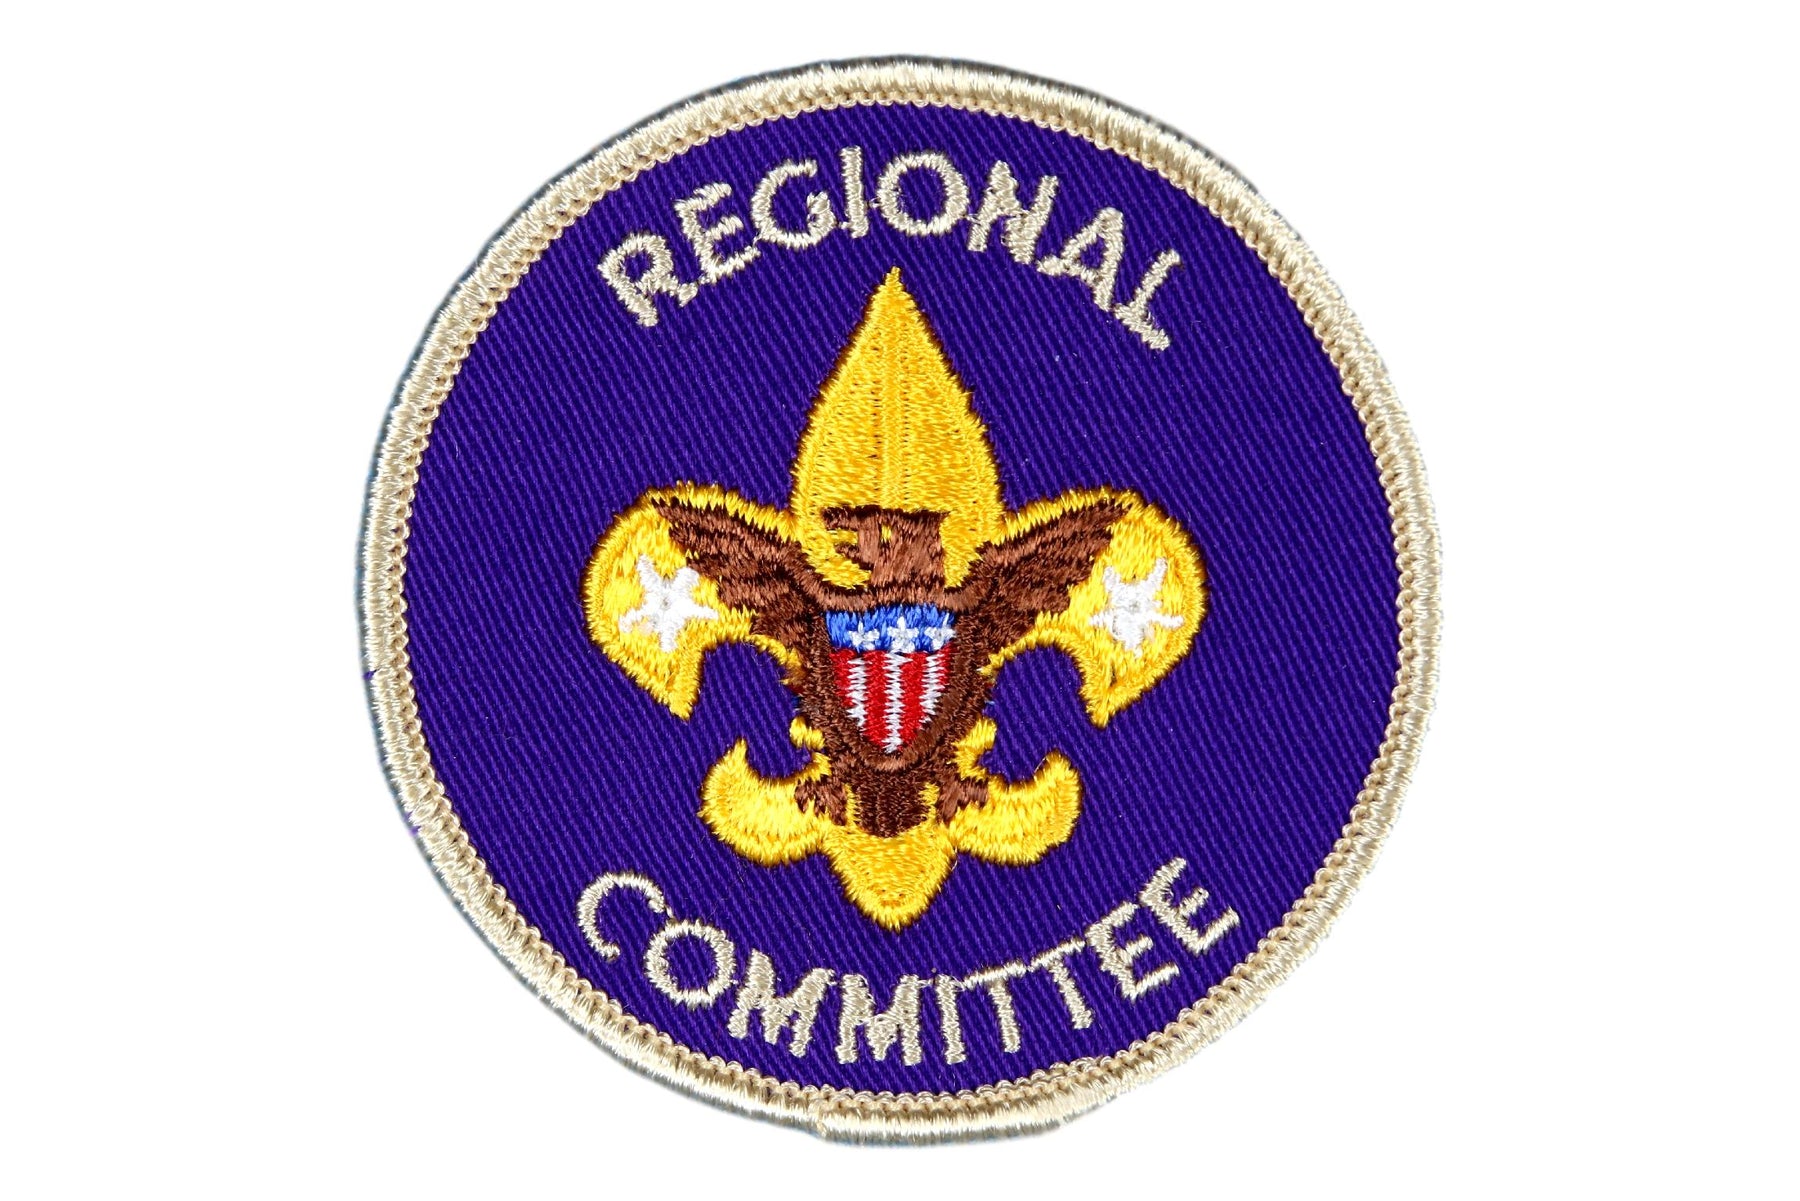 Regional Committee Patch